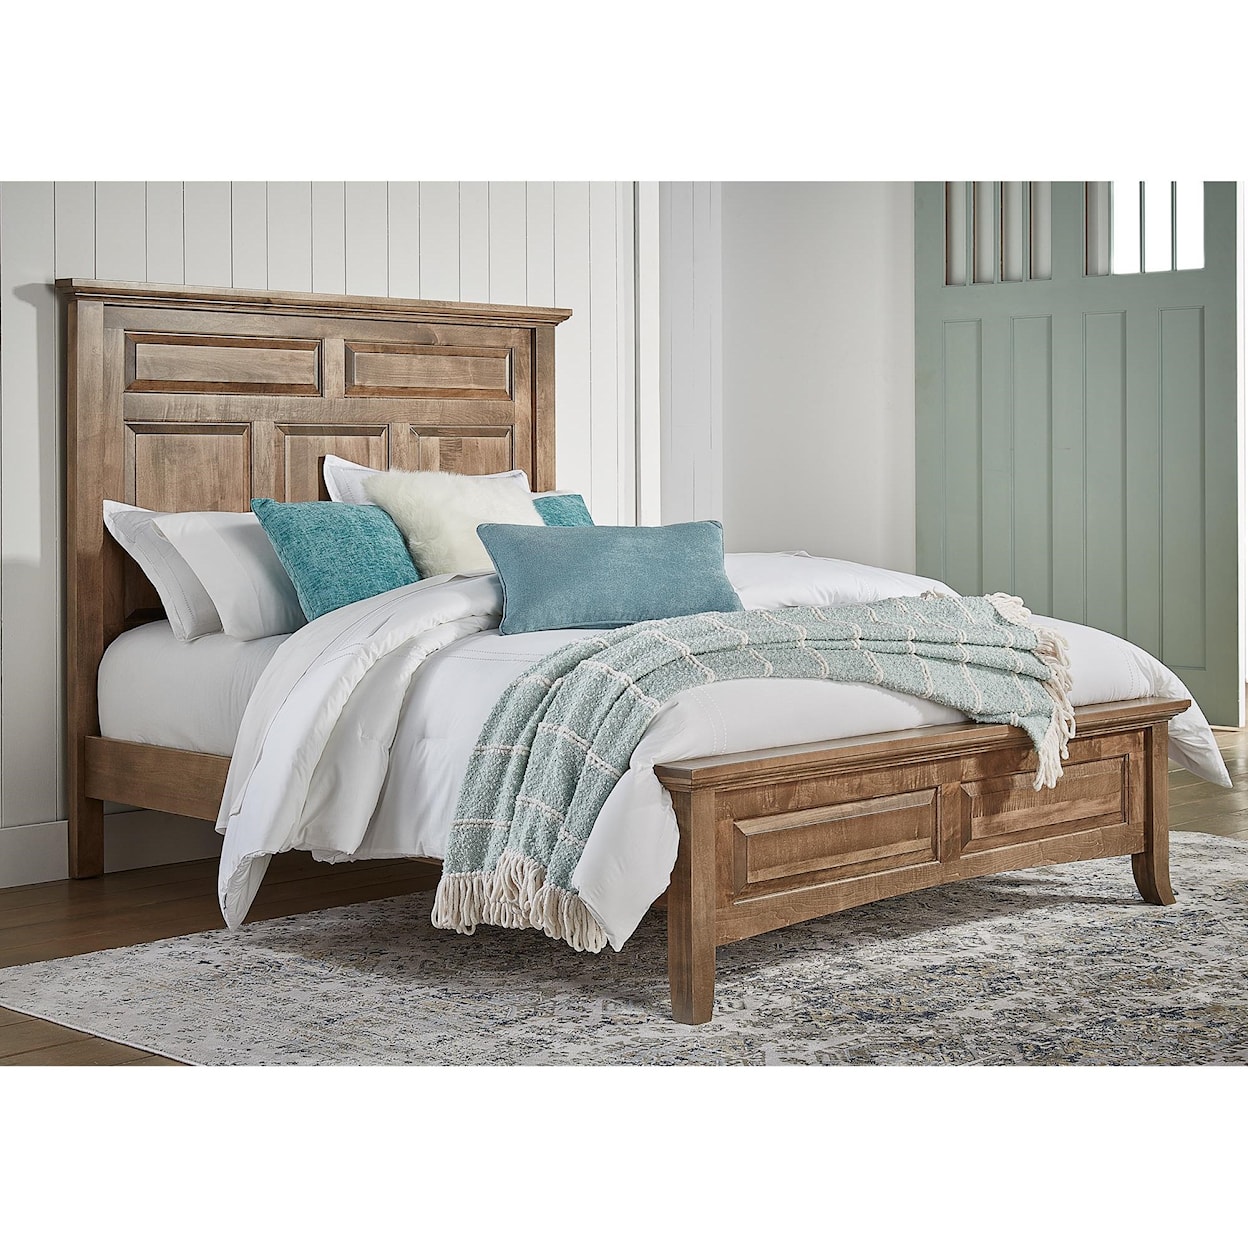 Archbold Furniture Provence Maple Collection Queen Panel Bed